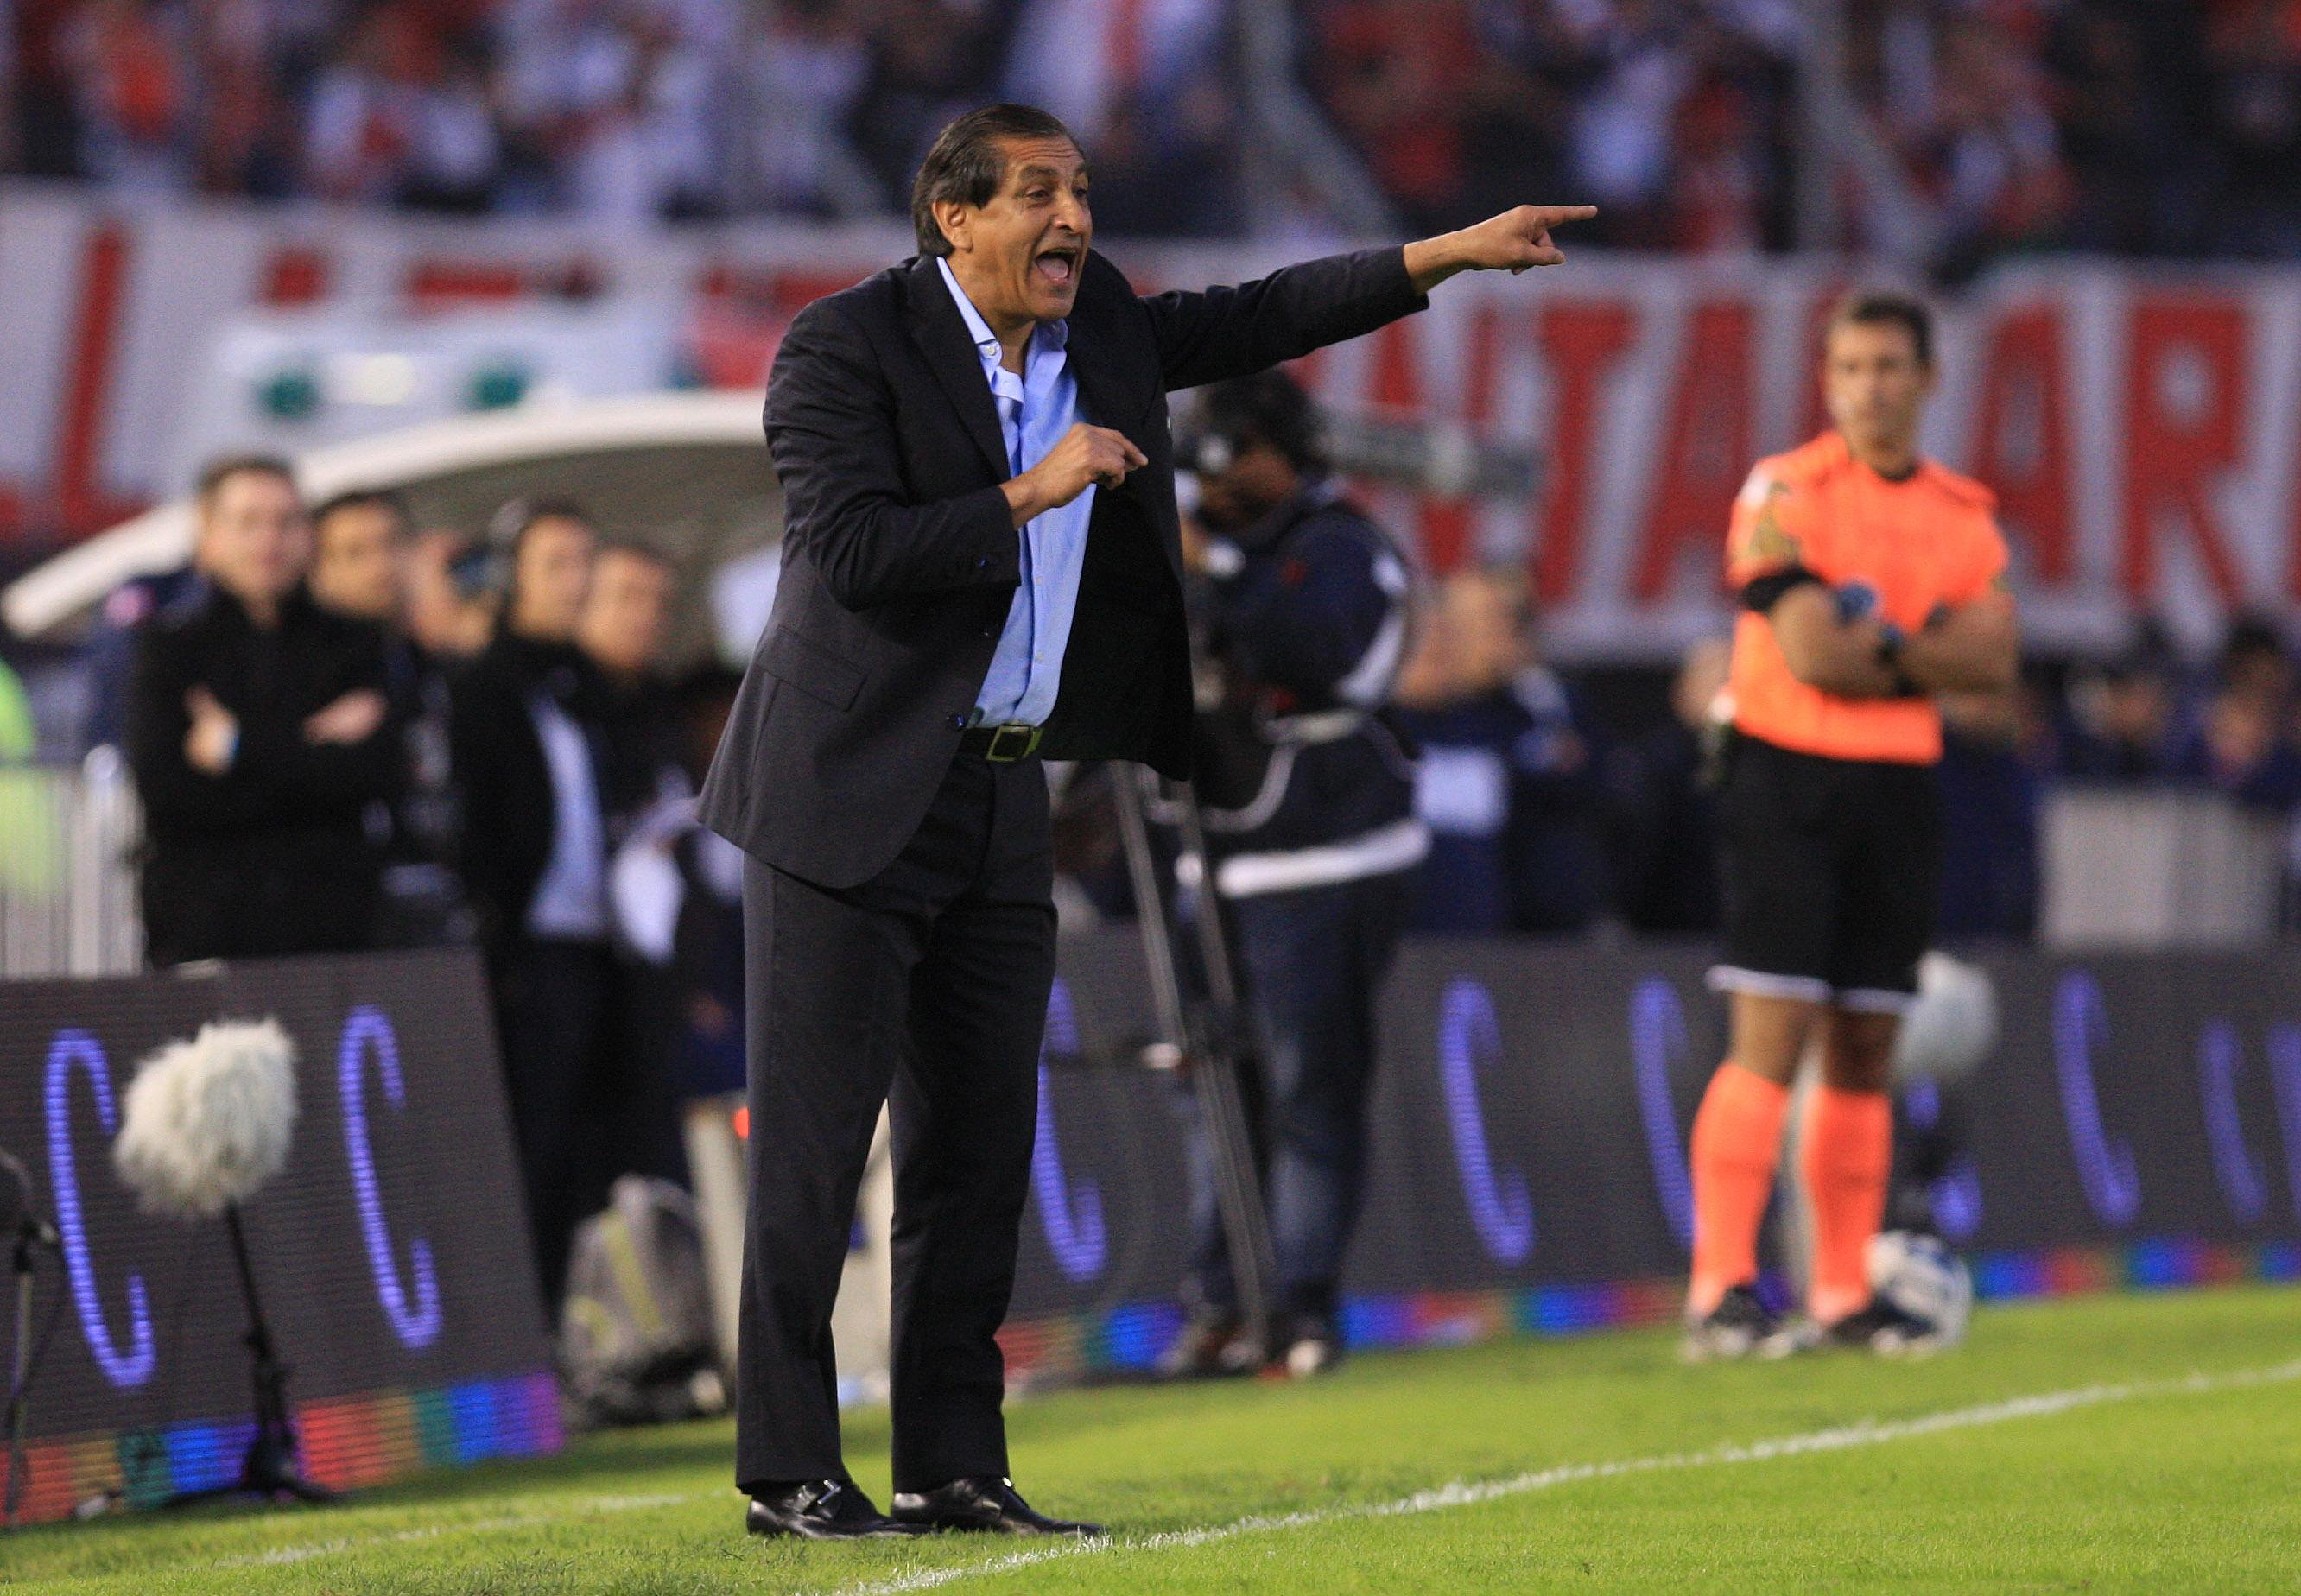 Football: in Brazil, Vasco coach questions the presence of a “woman” referee